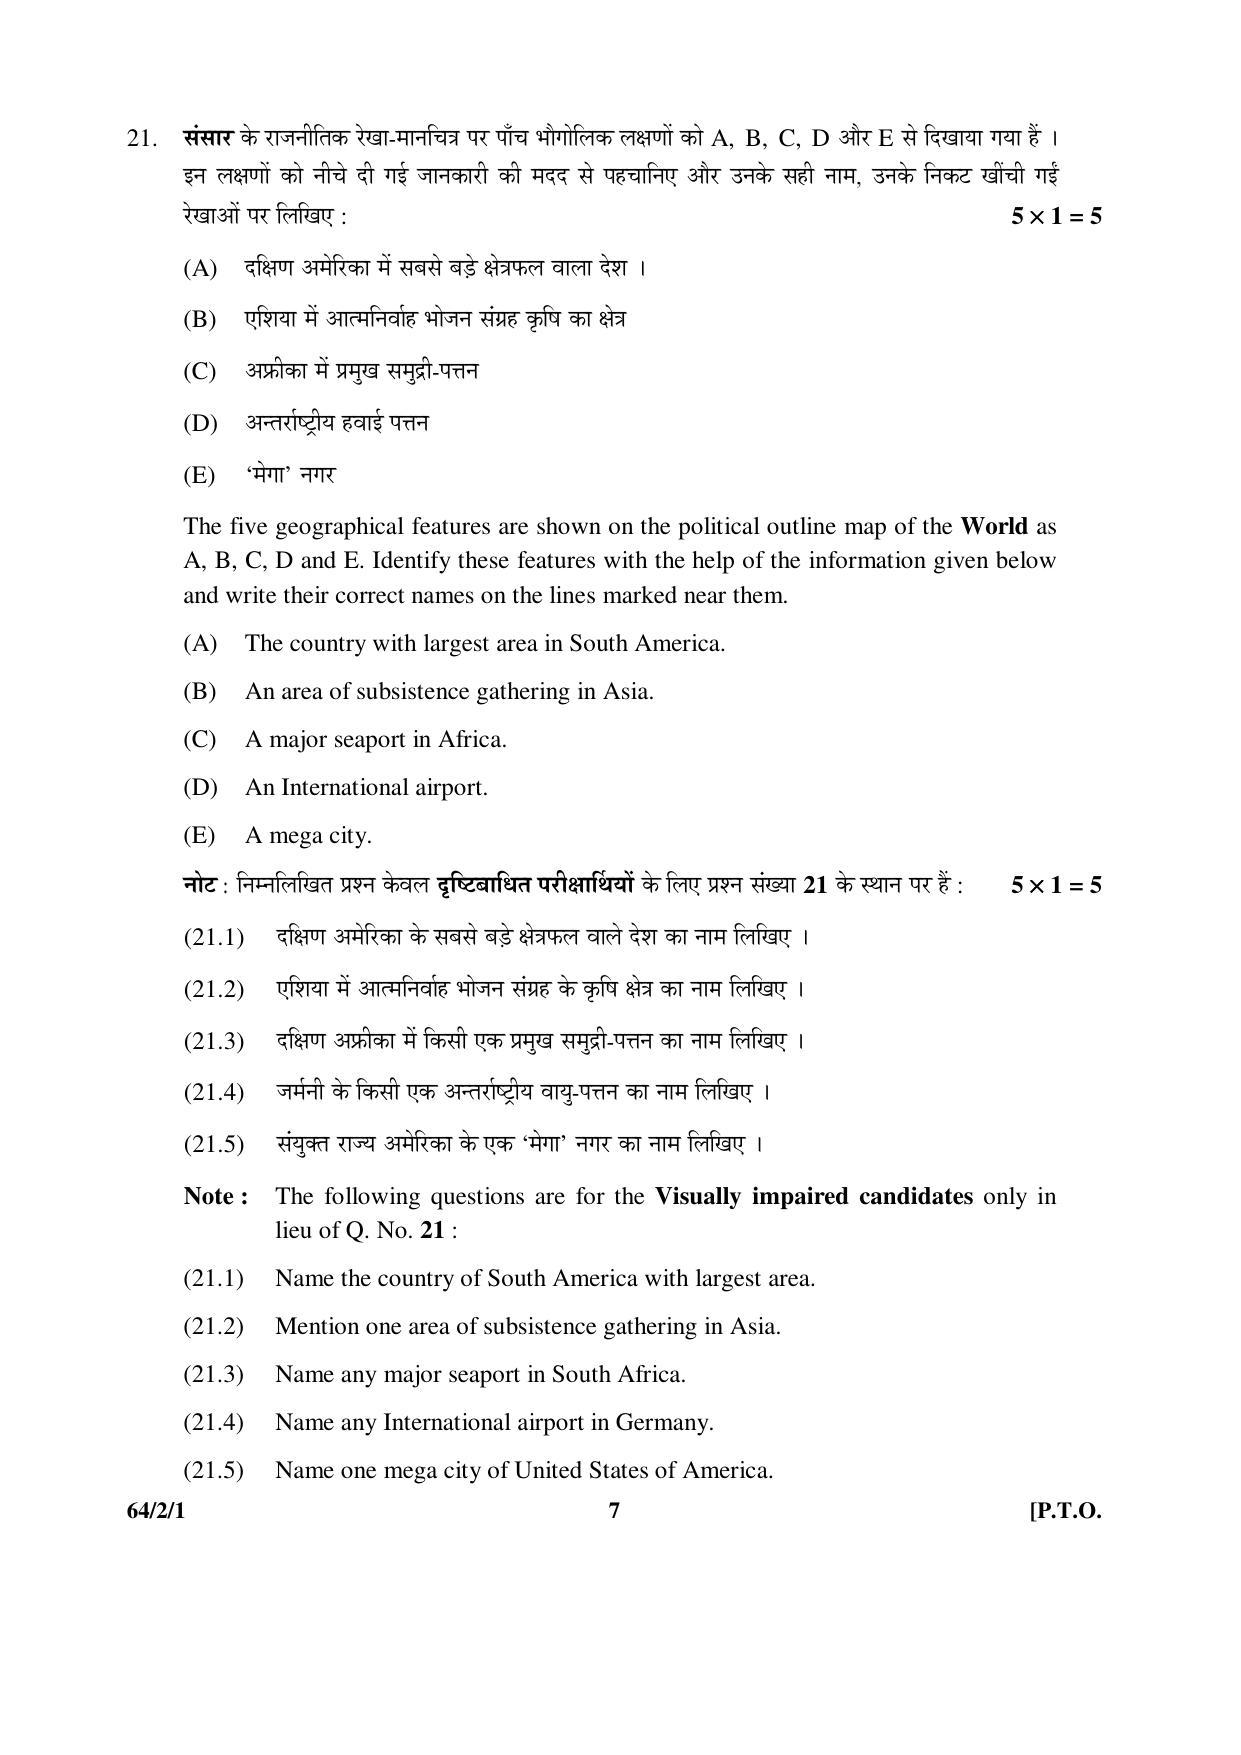 CBSE Class 12 64-2-1 Geography 2016 Question Paper - Page 7